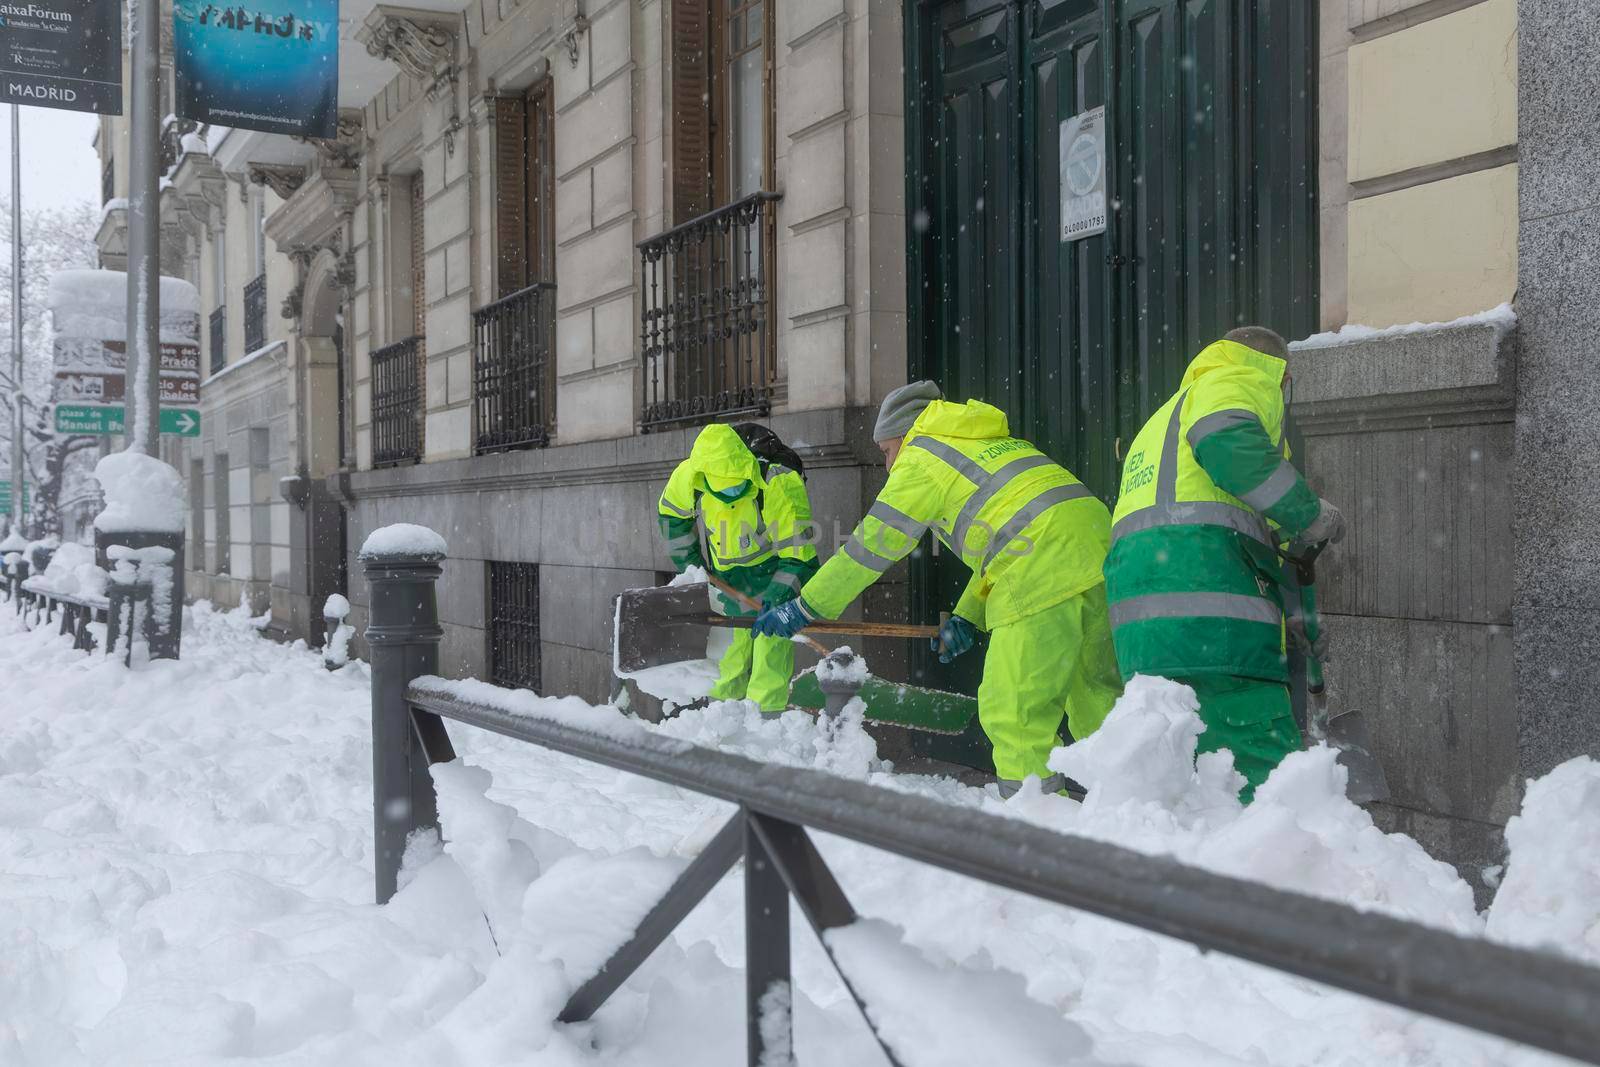 Municipal workers cleaning the sidewalks, Madrid. by alvarobueno